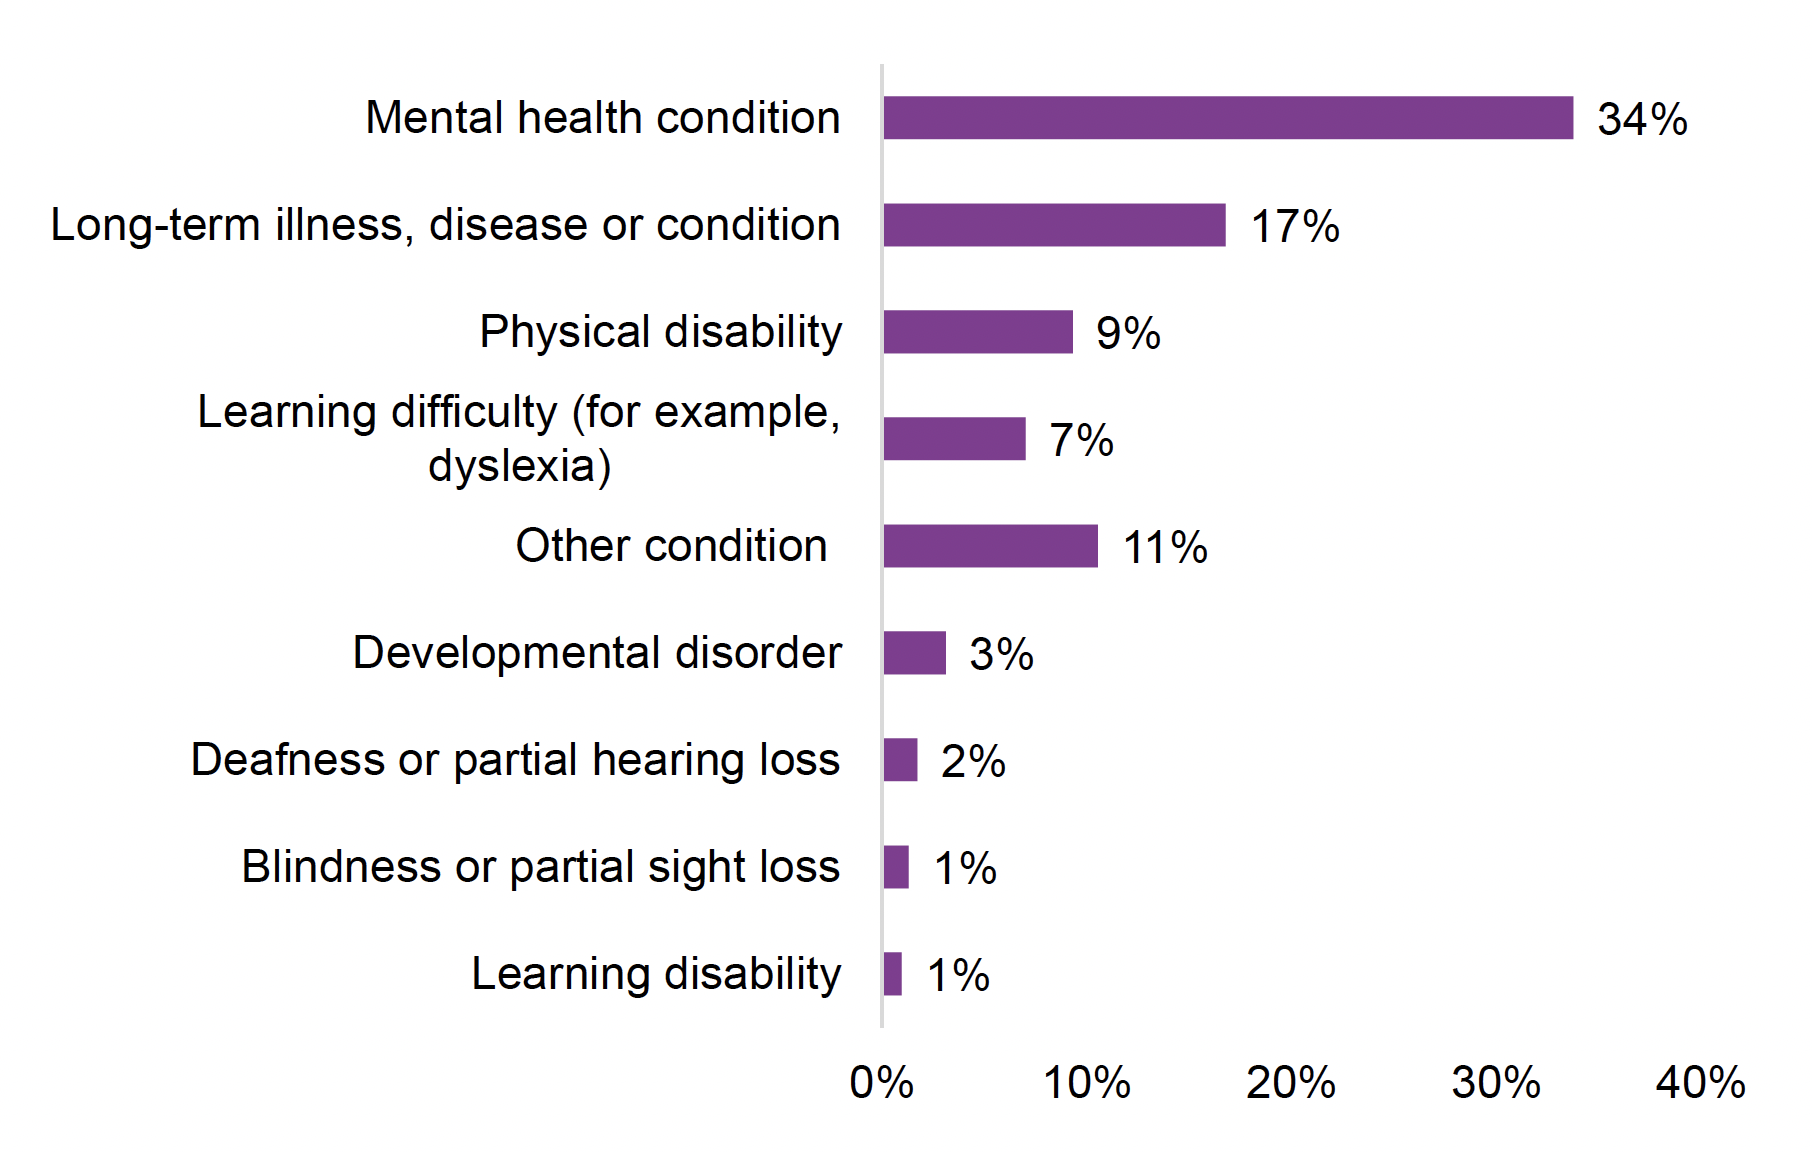 The long-term health conditions reported most in FSS are mental health conditions (34%)